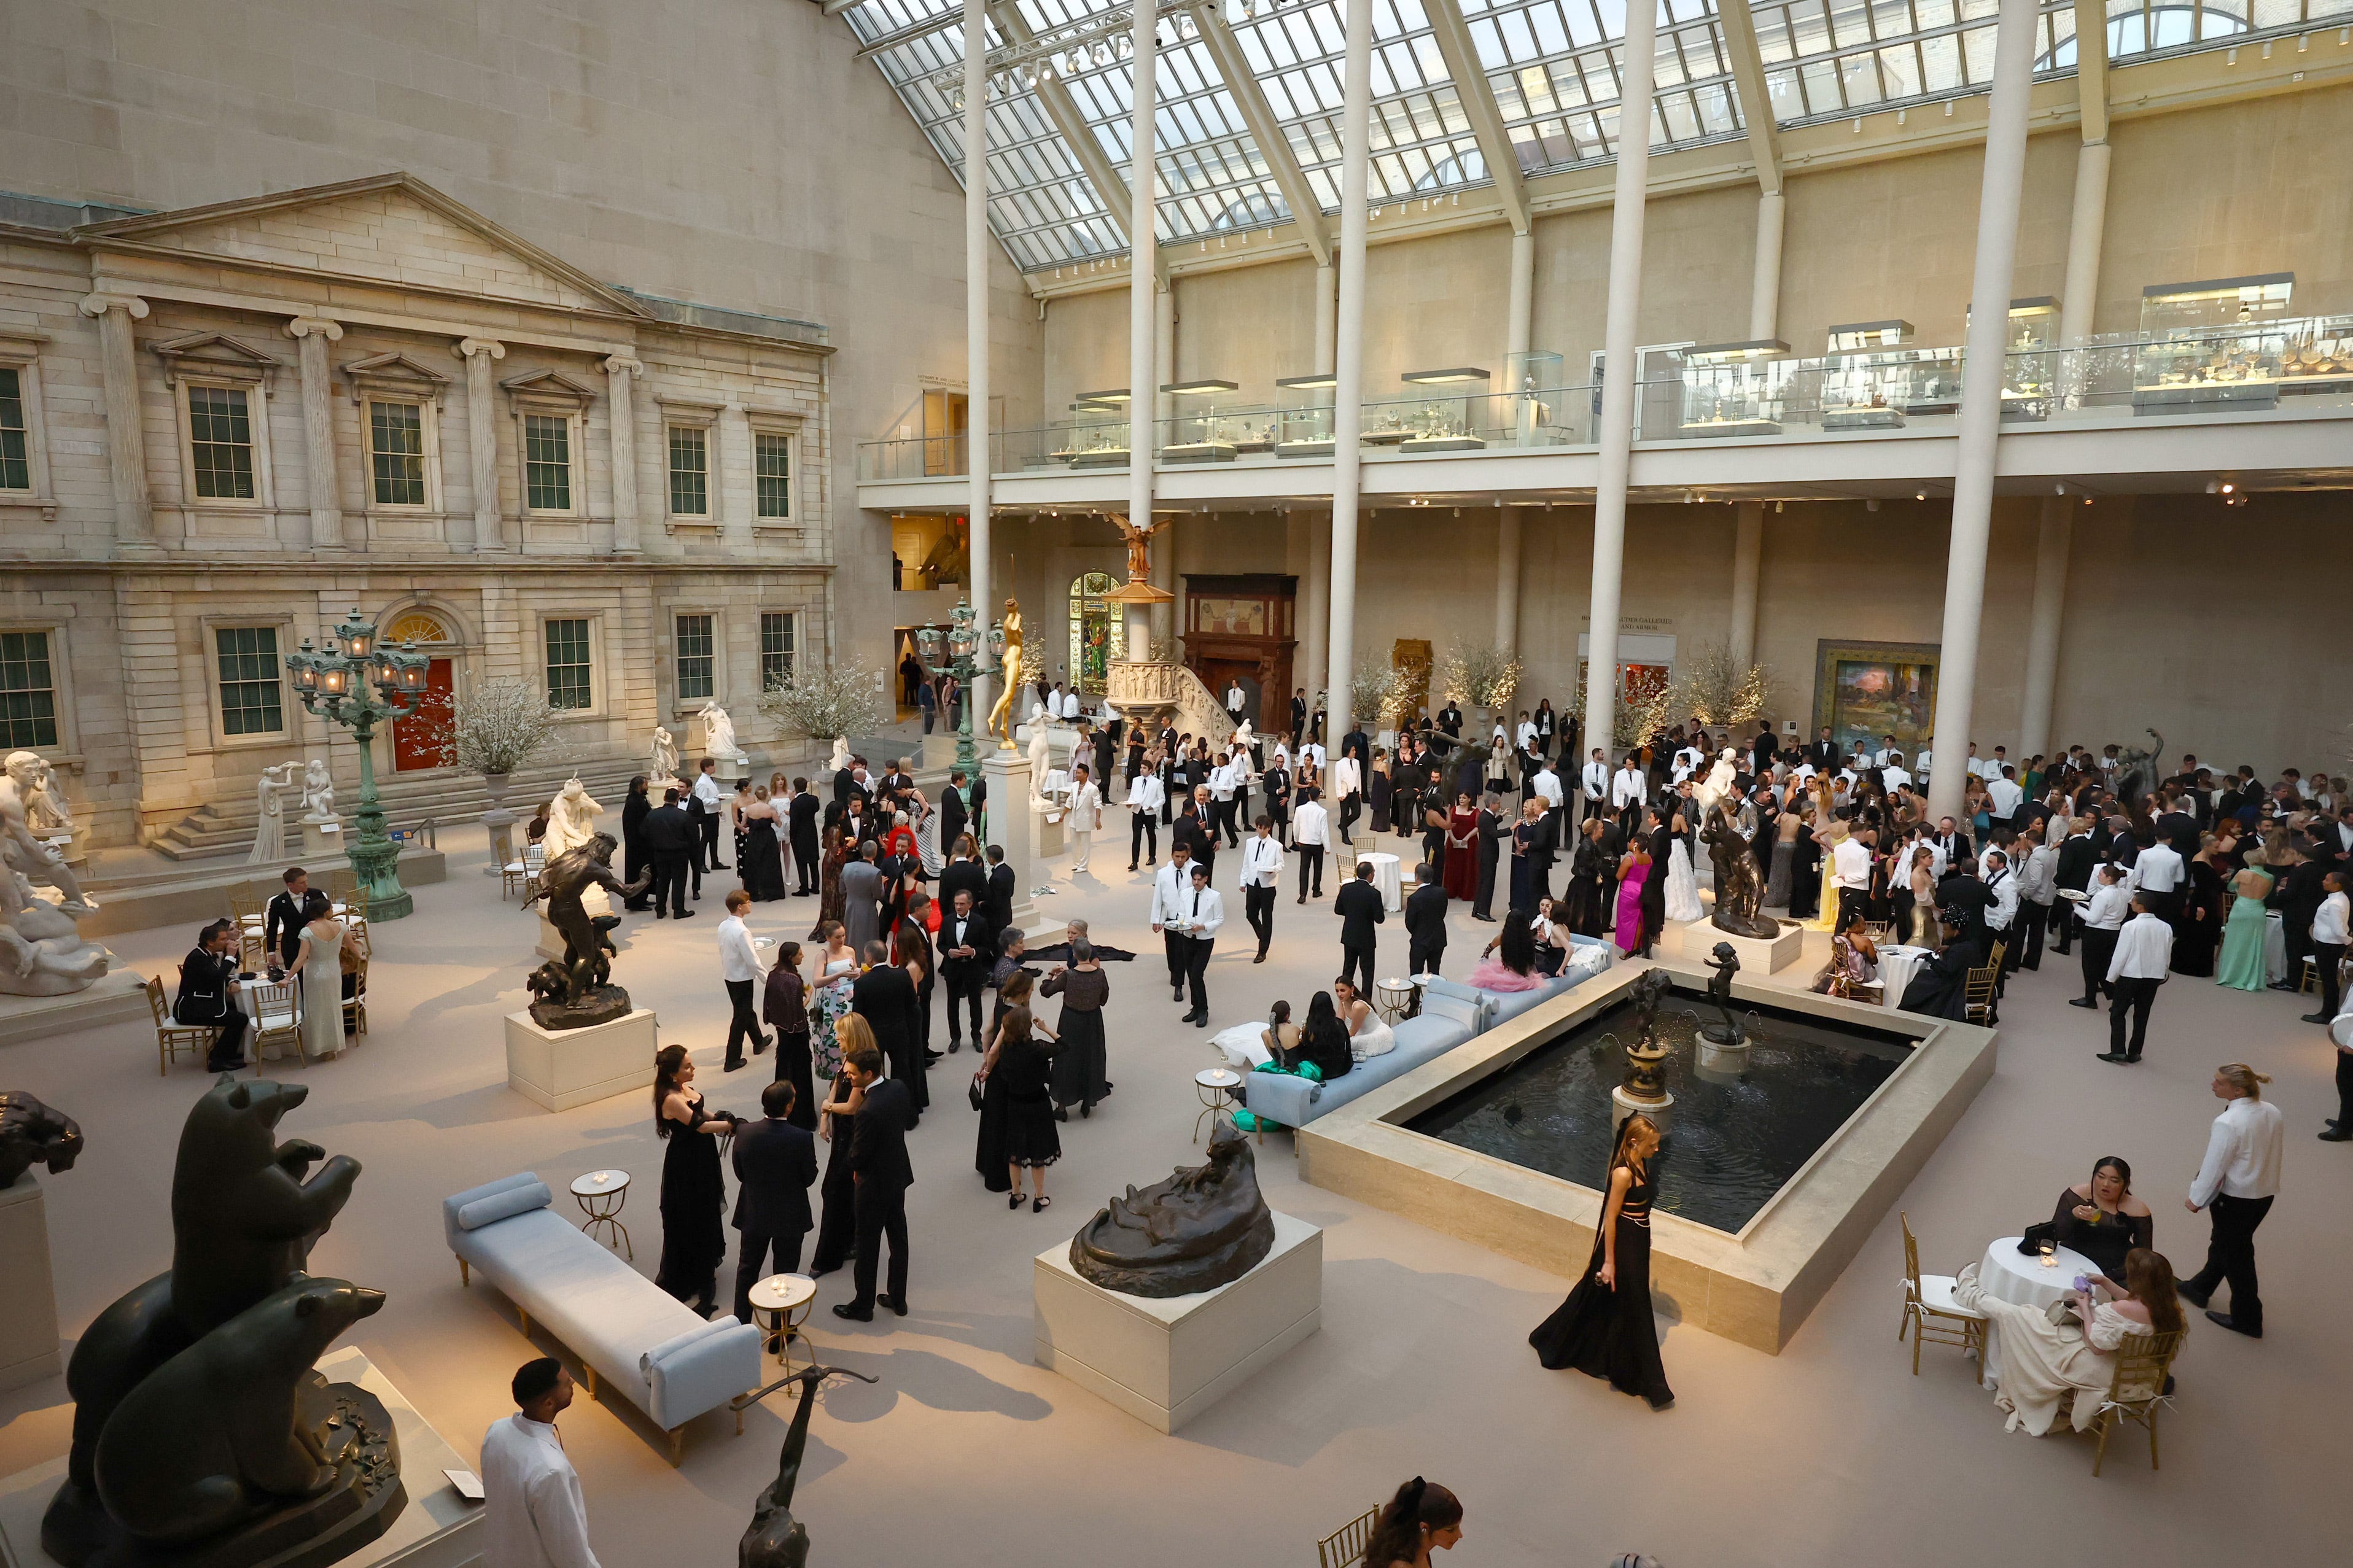 <p><span>The Met Gala, a fundraiser for the Costume Institute at the Metropolitan Museum of Art, is notoriously exclusive. Each year, the guest list is approved by Vogue editor in chief </span><a href="https://www.businessinsider.com/anna-wintour-met-gala-red-carpet-outfits-2024-5"><span>Anna Wintour</span></a><span>, and attendees then pay a hefty entry fee.</span></p><p><span>This year, individual tickets cost a record $75,000, while tables start at $350,000.</span></p><p><span>For that price, they get access to a glamorous party where they can mingle with other celebrities and enjoy cocktails, a formal dinner, and surprise musical performances.</span></p><p><a class="live-blog-button" href="https://www.businessinsider.com/met-gala-tickets-cost-2024-5">Read full story</a></p>